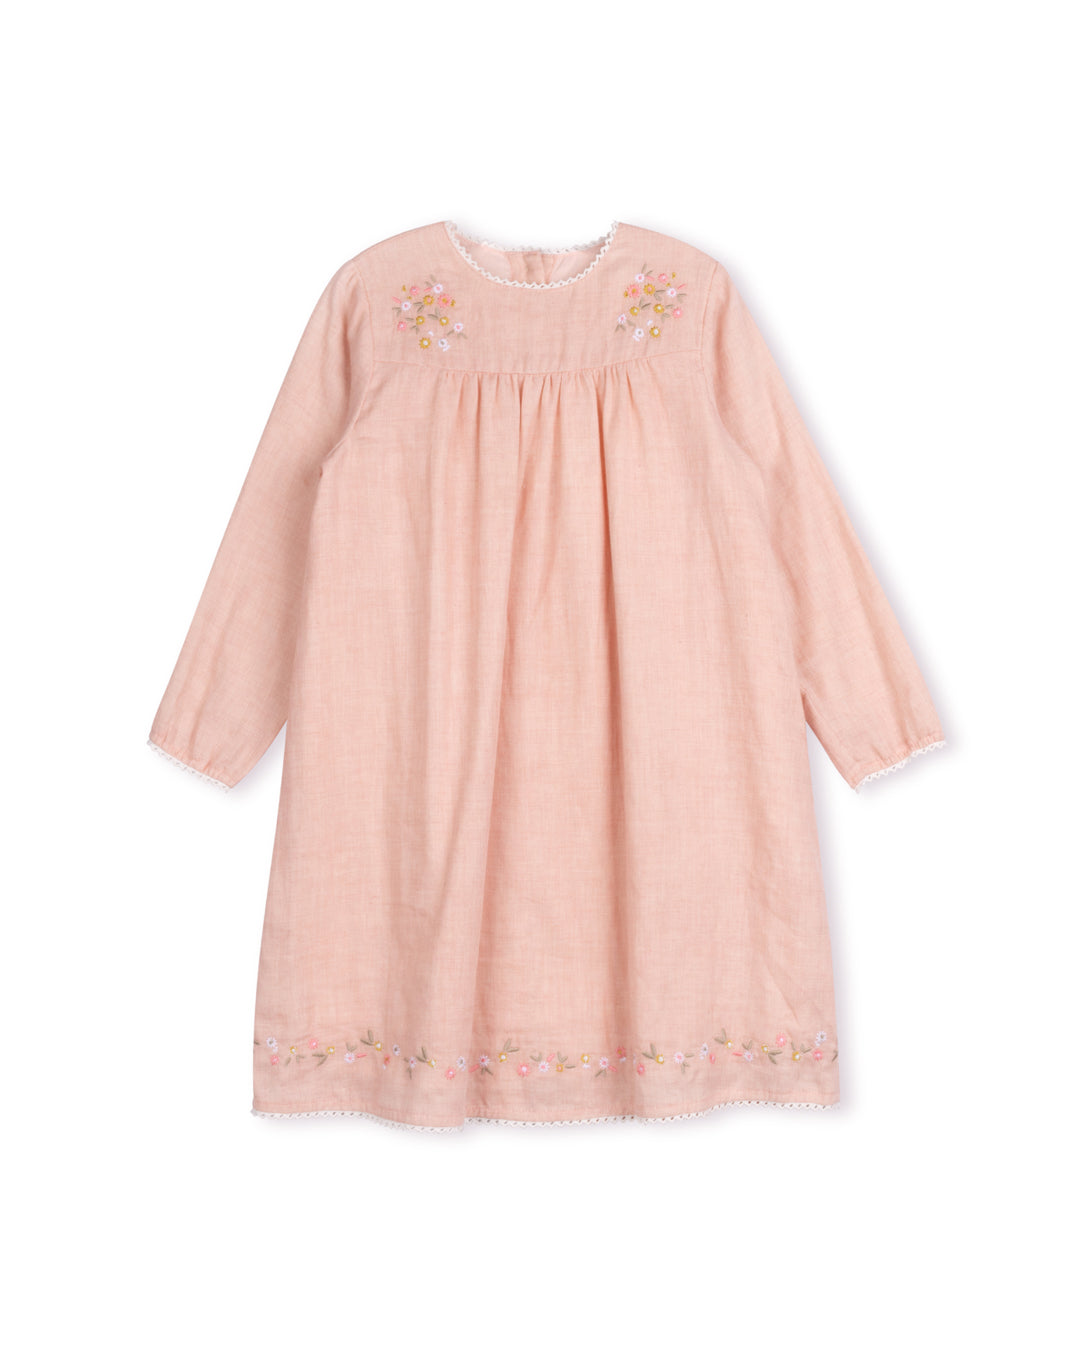 LILOU PINK EMBROIDERED FLORAL BABYDOLL DRESS [FINAL SALE]